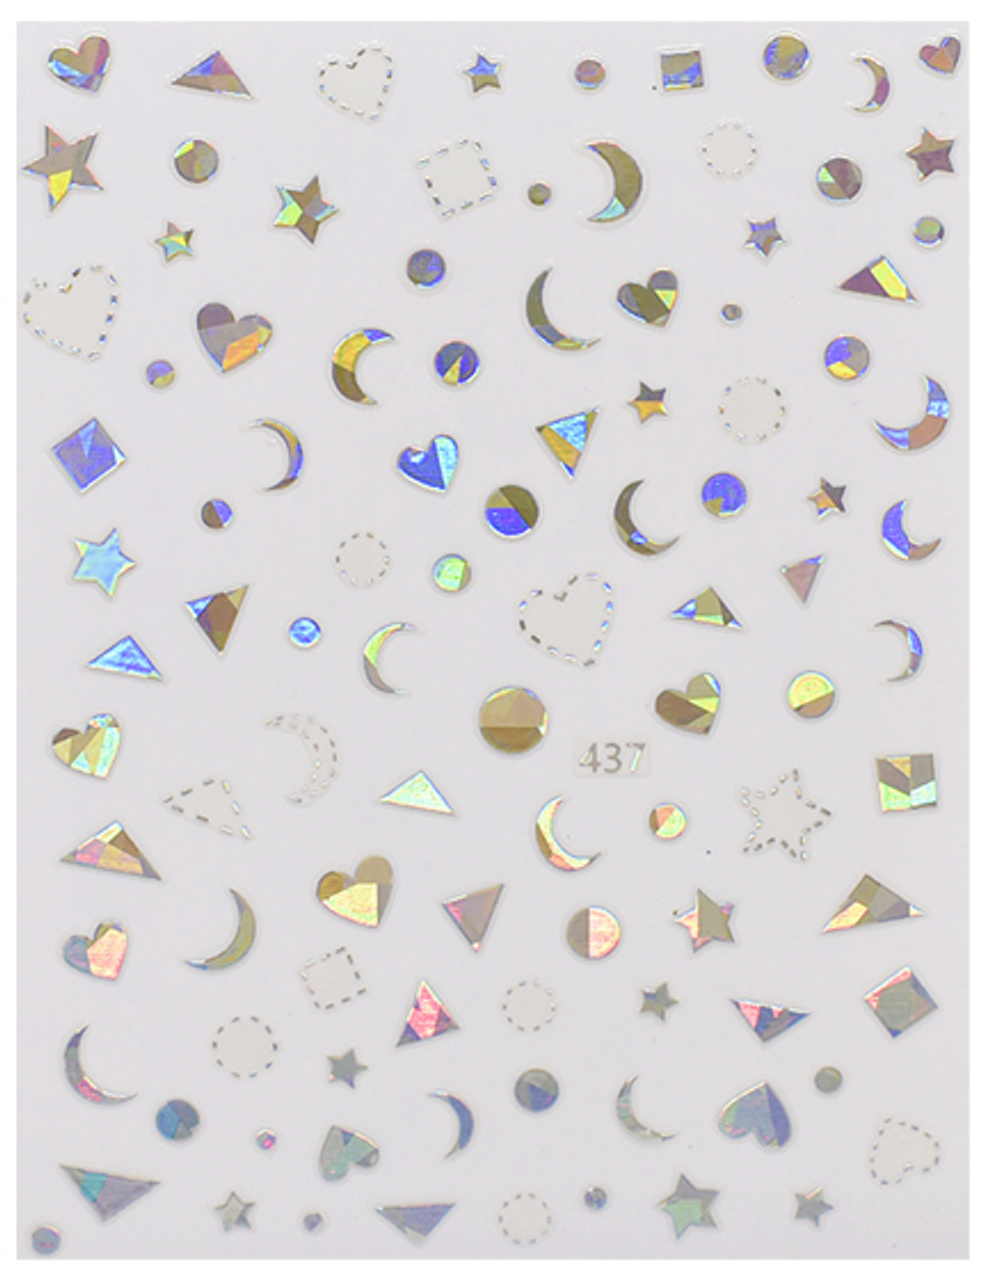 Holographic Gold & Silver Shapes Nail Art Stickers